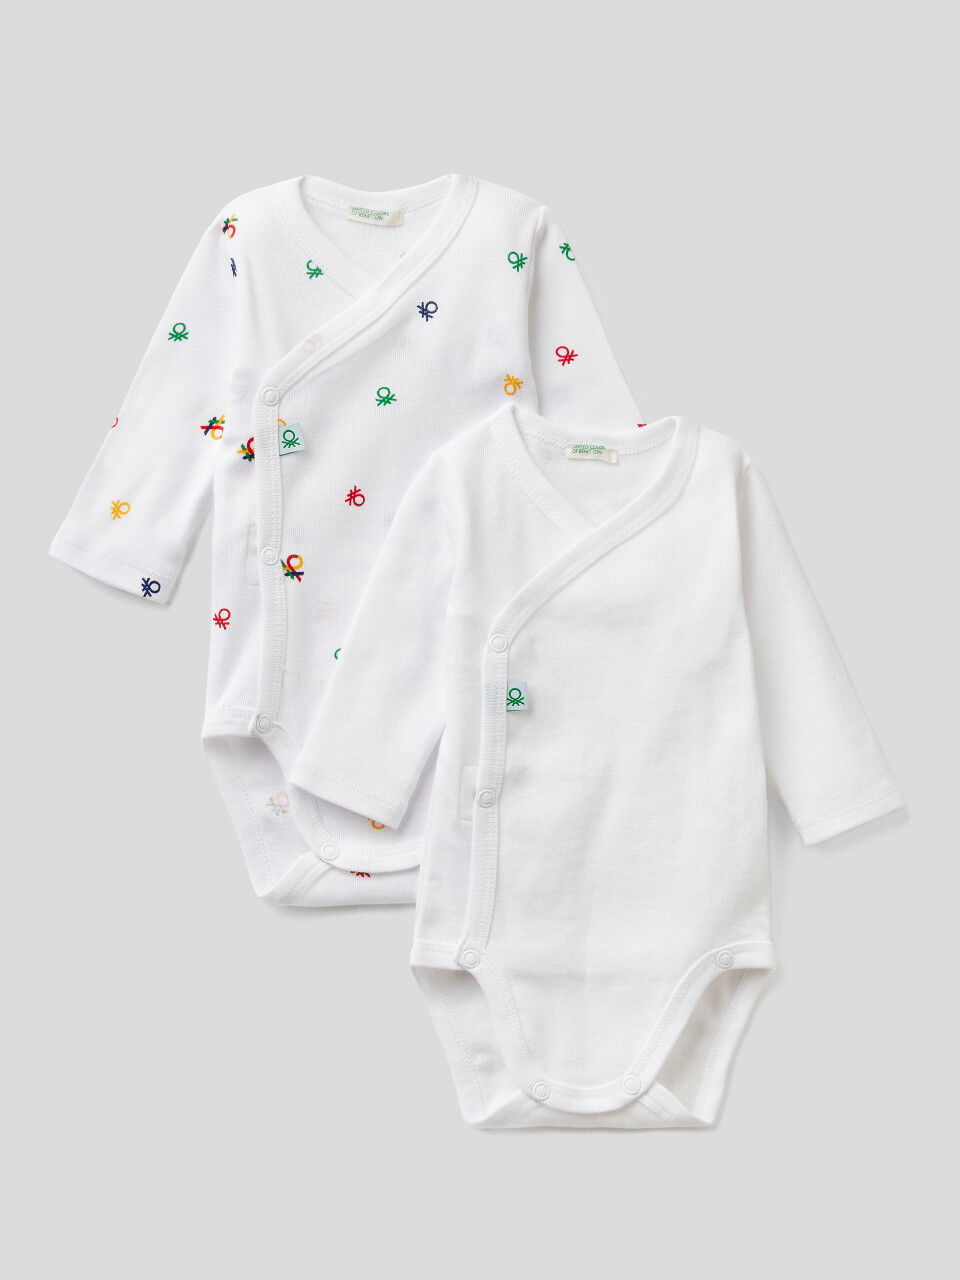 Two long sleeve bodysuits in organic cotton